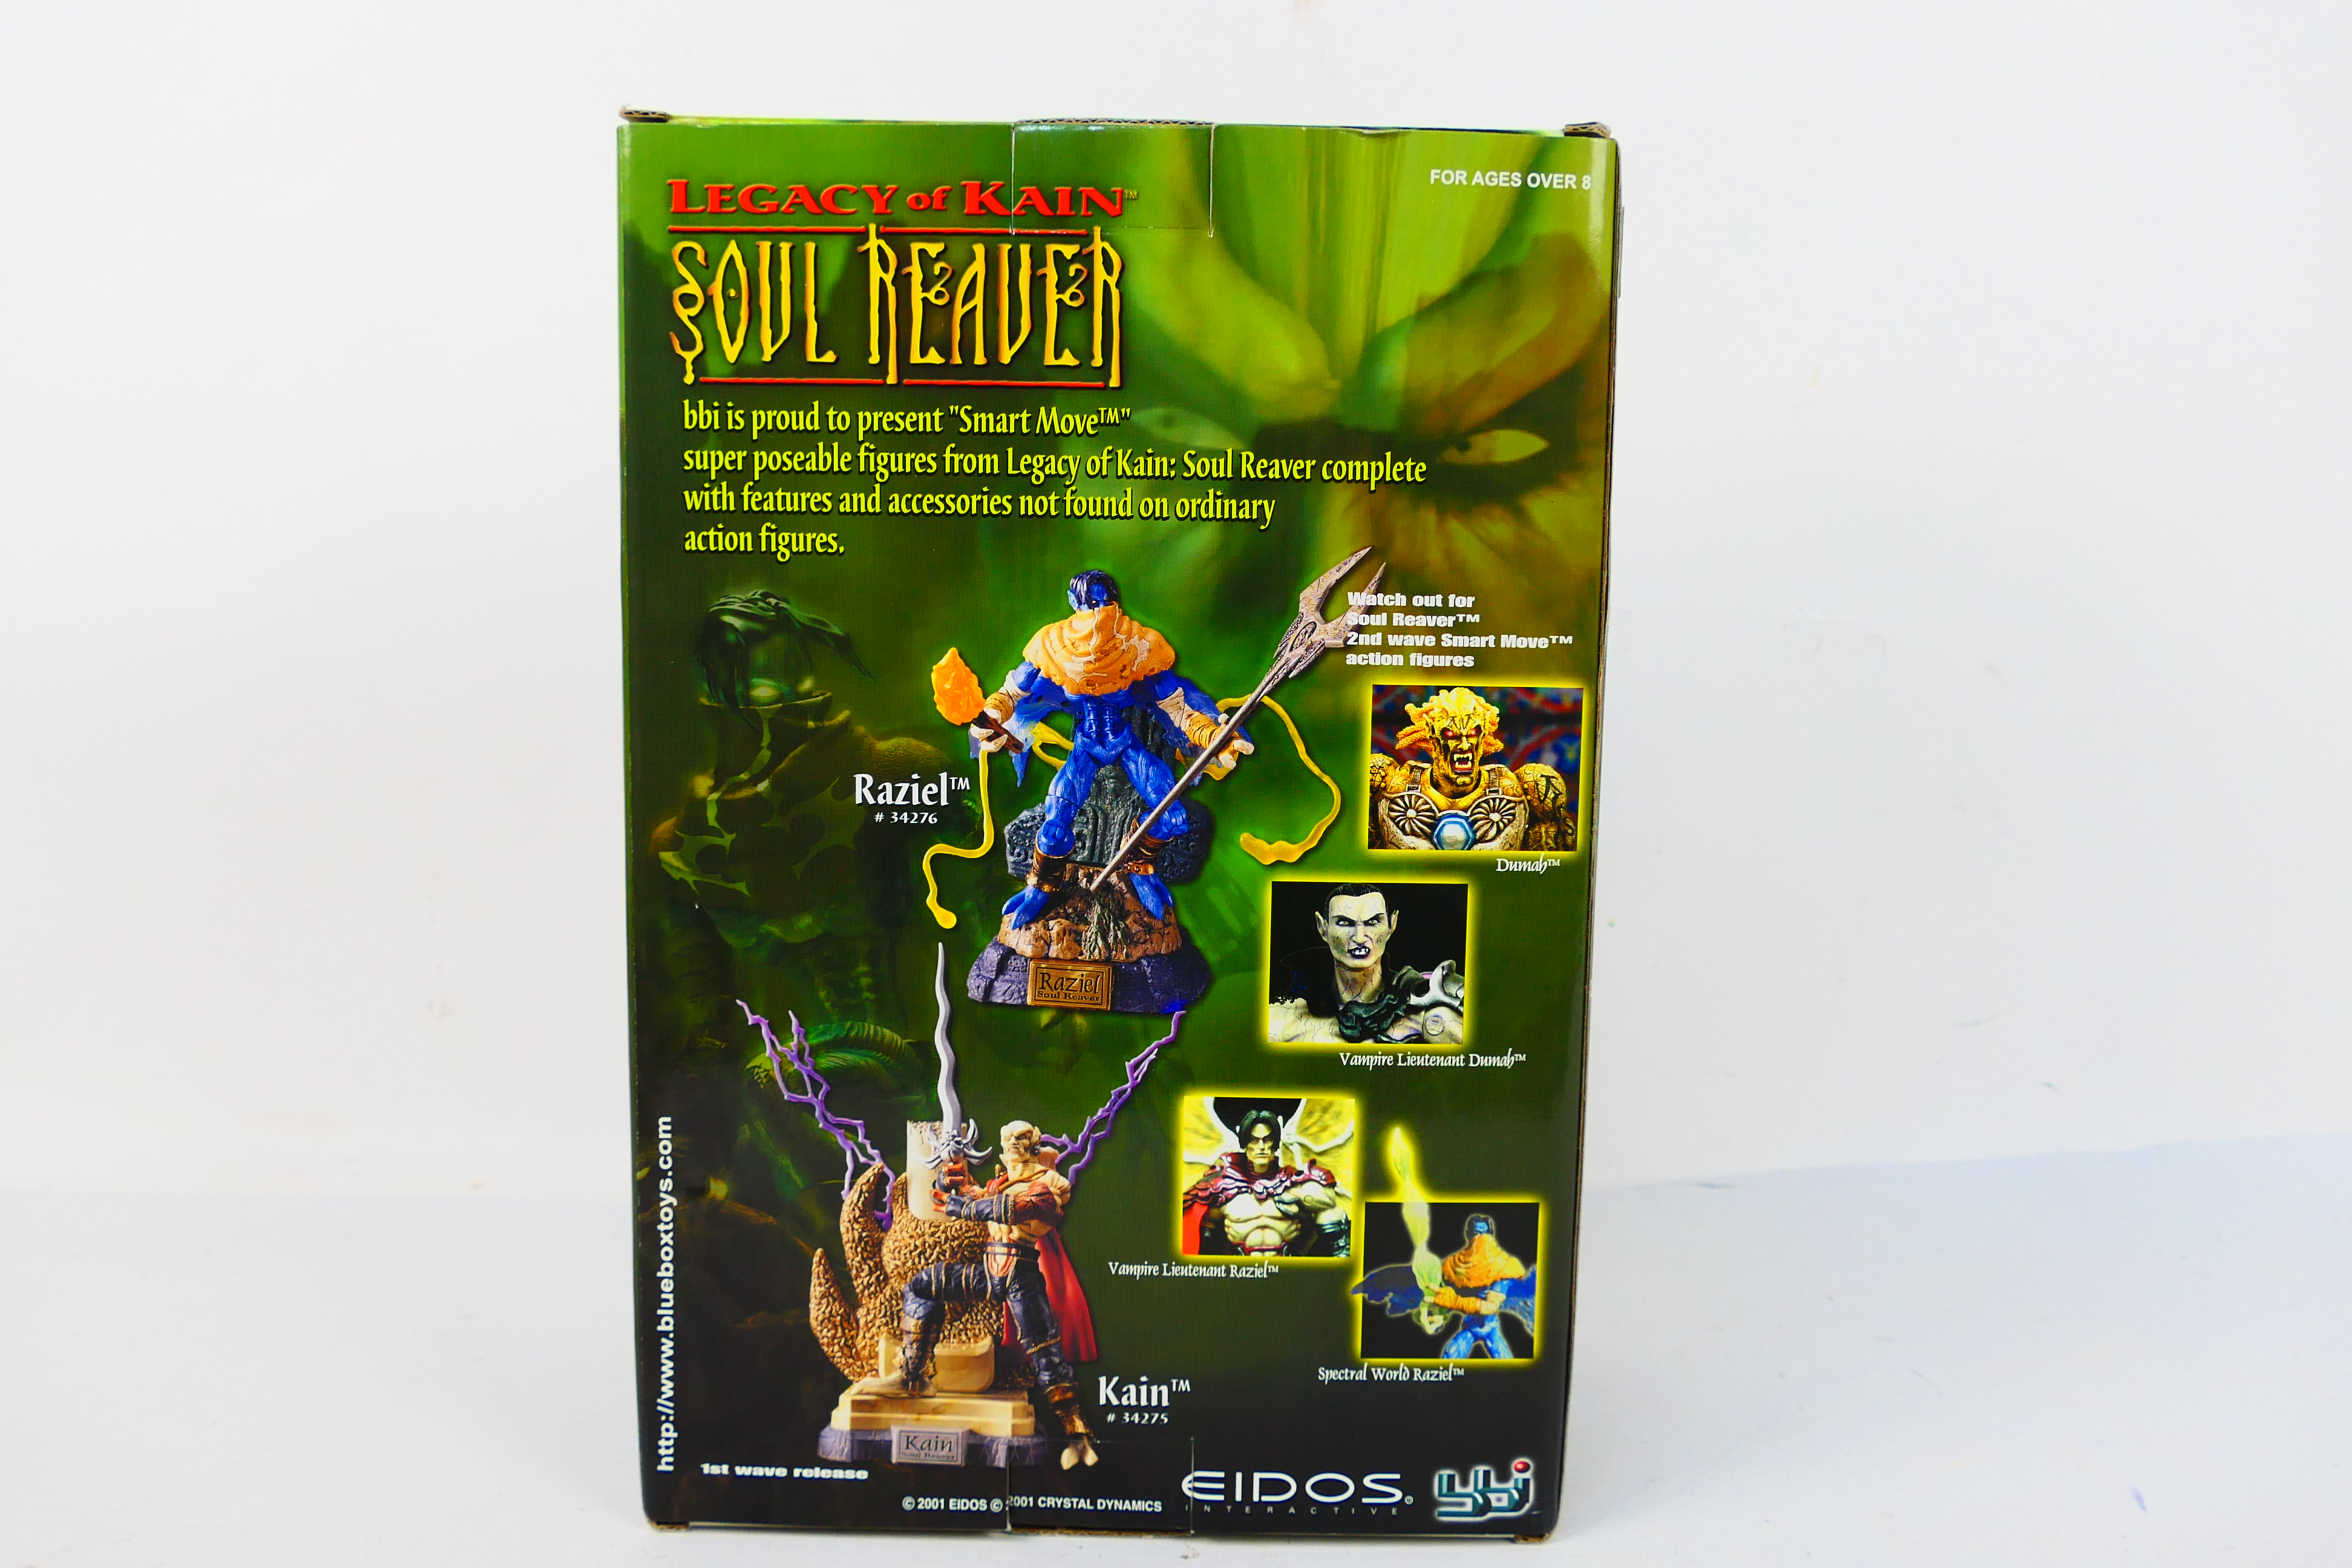 Eidos - A boxed Legacy of Kain Soul Reaver 'Raziel' figure - The #34276 figure appears mint in box. - Image 2 of 2